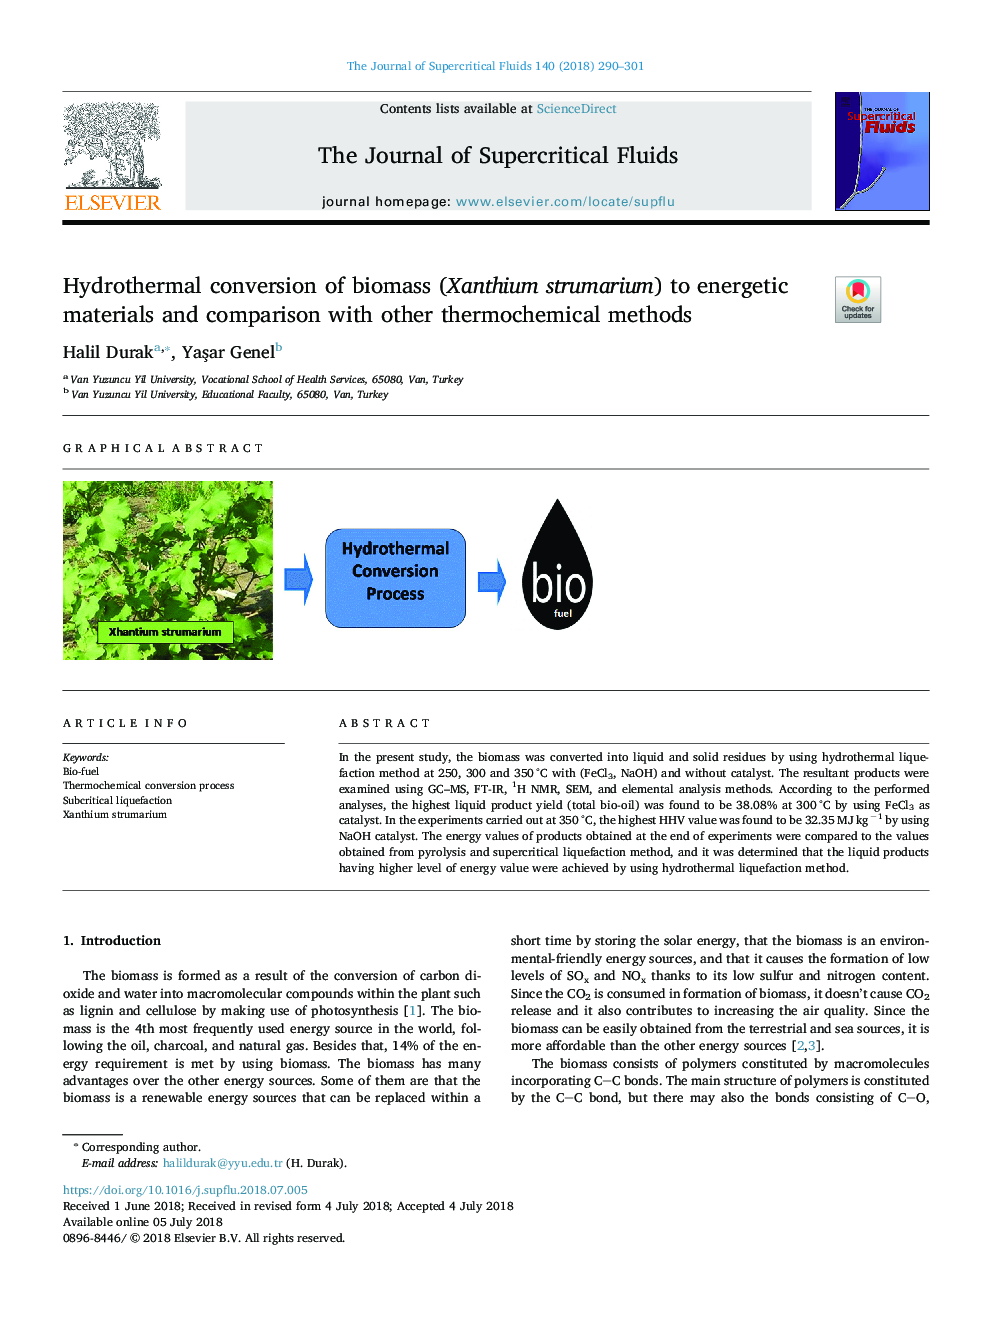 Hydrothermal conversion of biomass (Xanthium strumarium) to energetic materials and comparison with other thermochemical methods